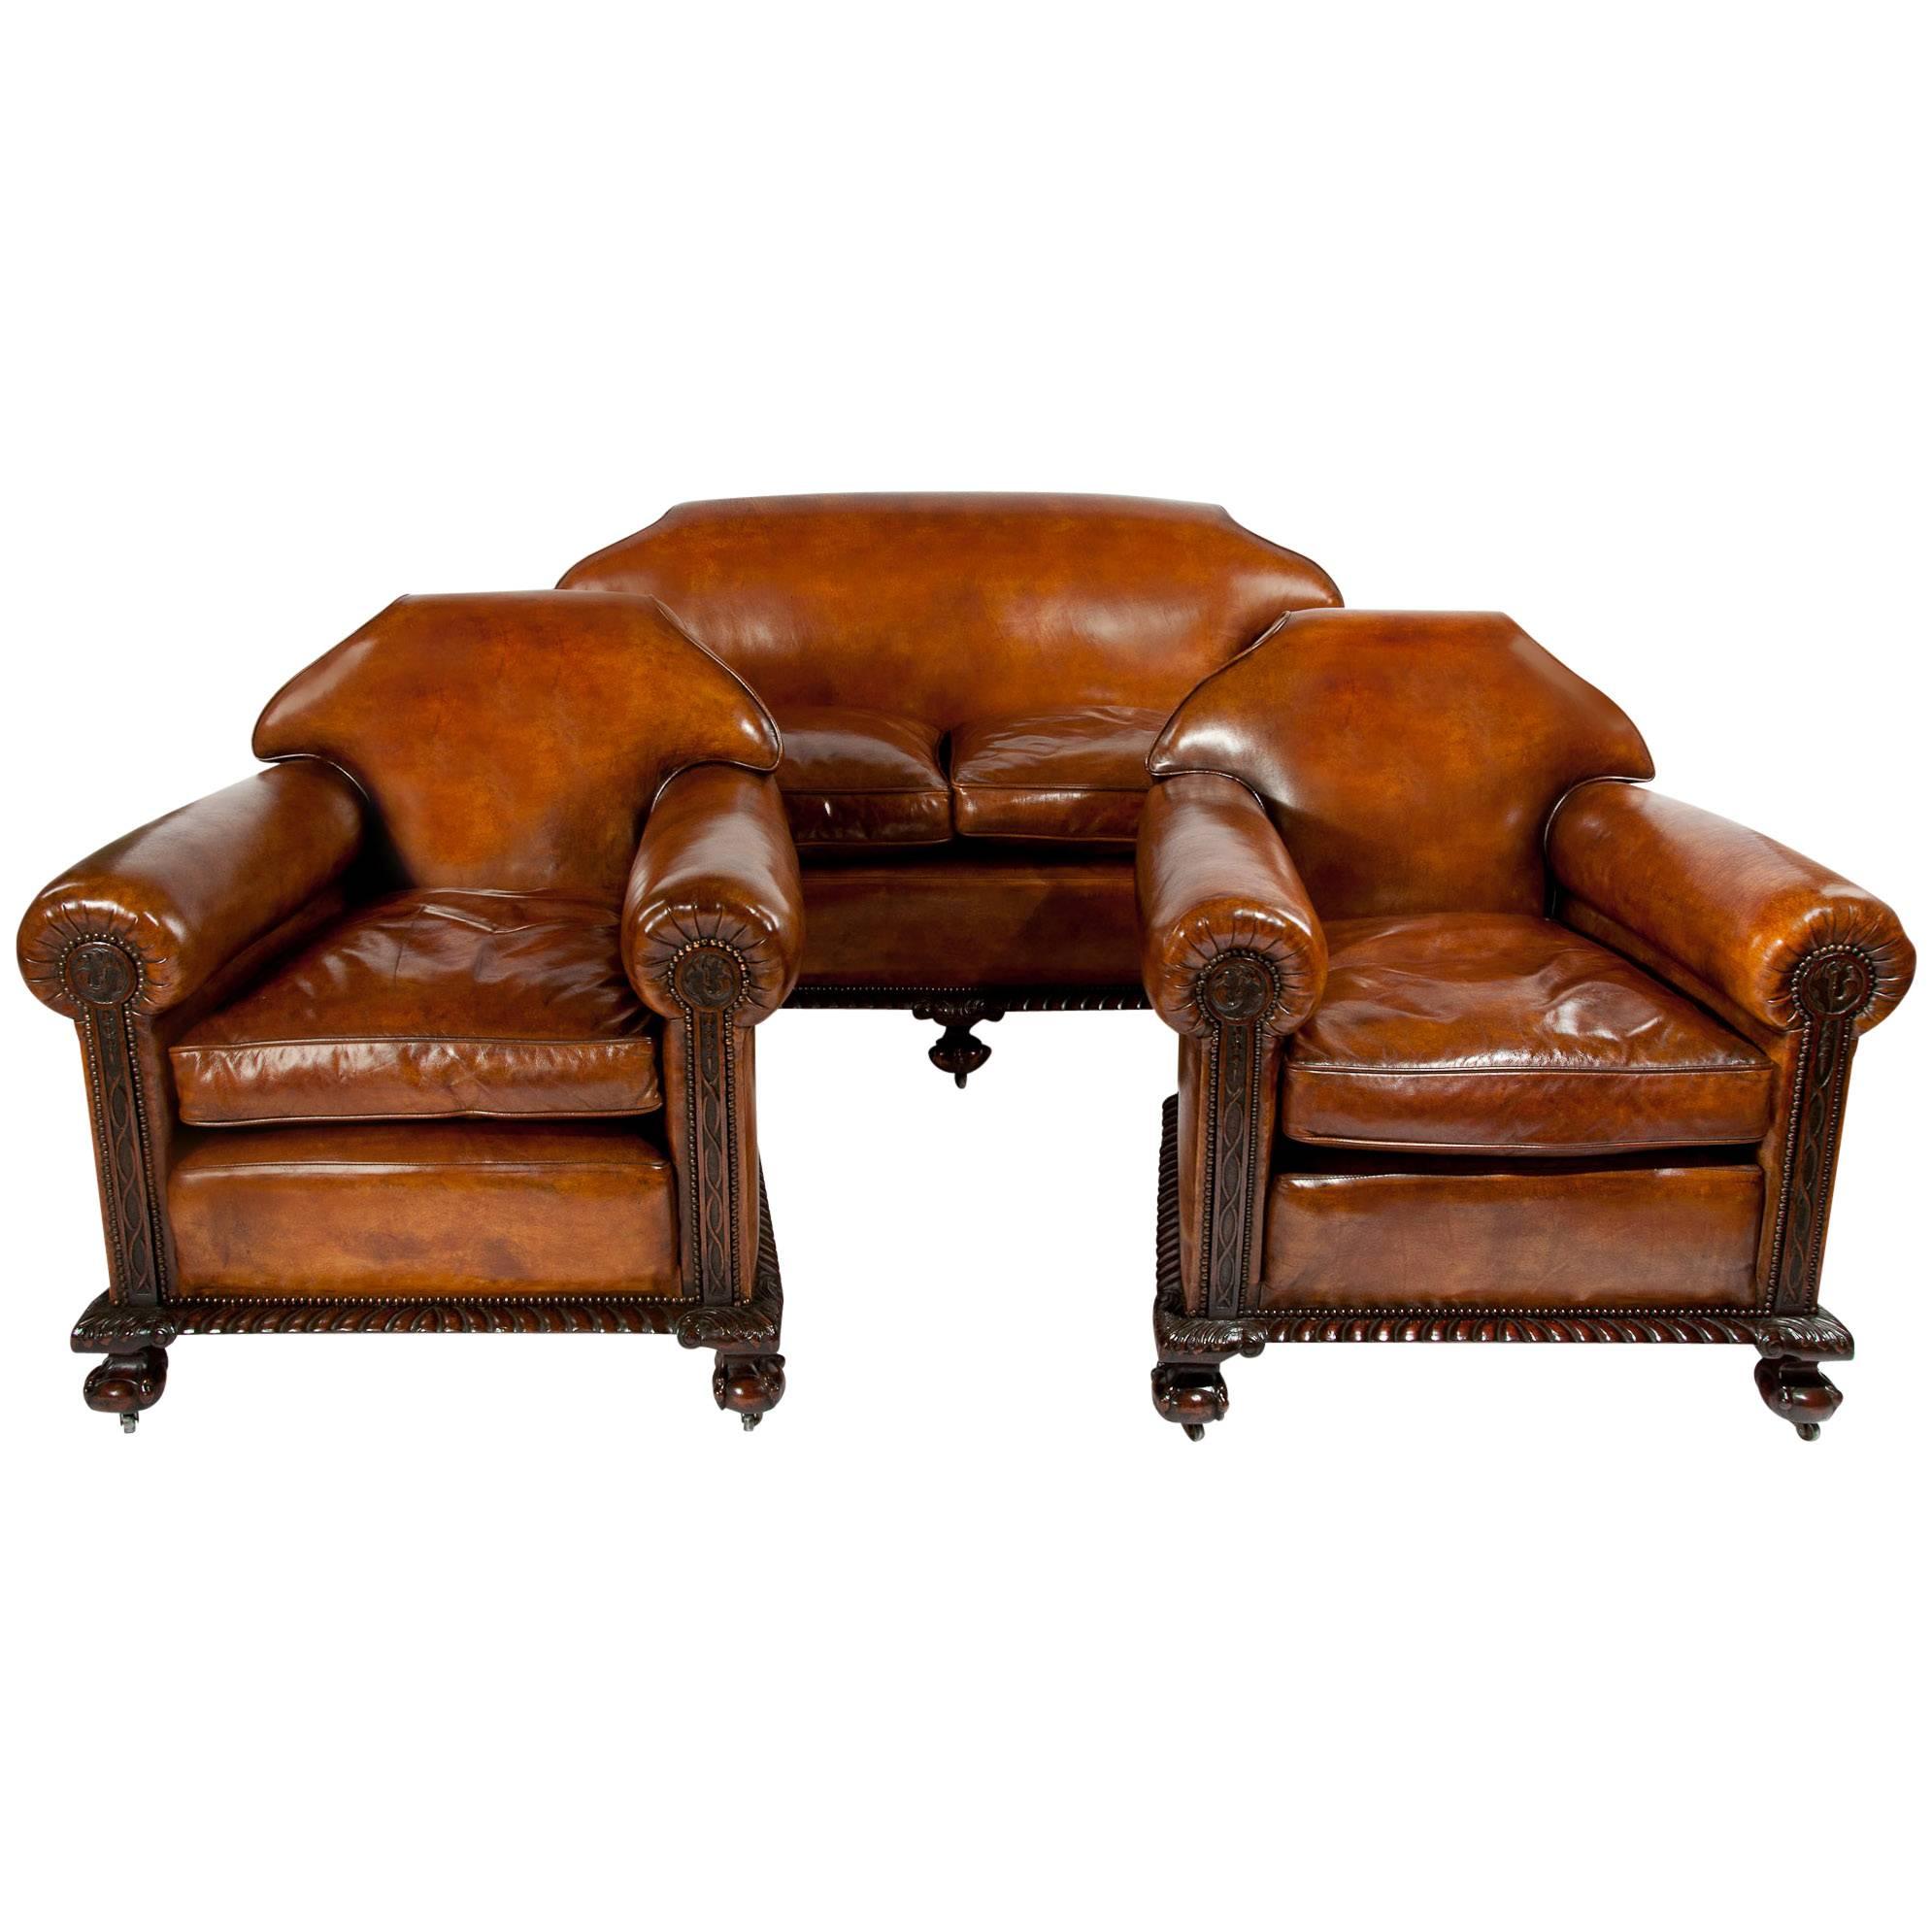 Magnificent Victorian Leather Sofa and Chairs Three-Piece Suite